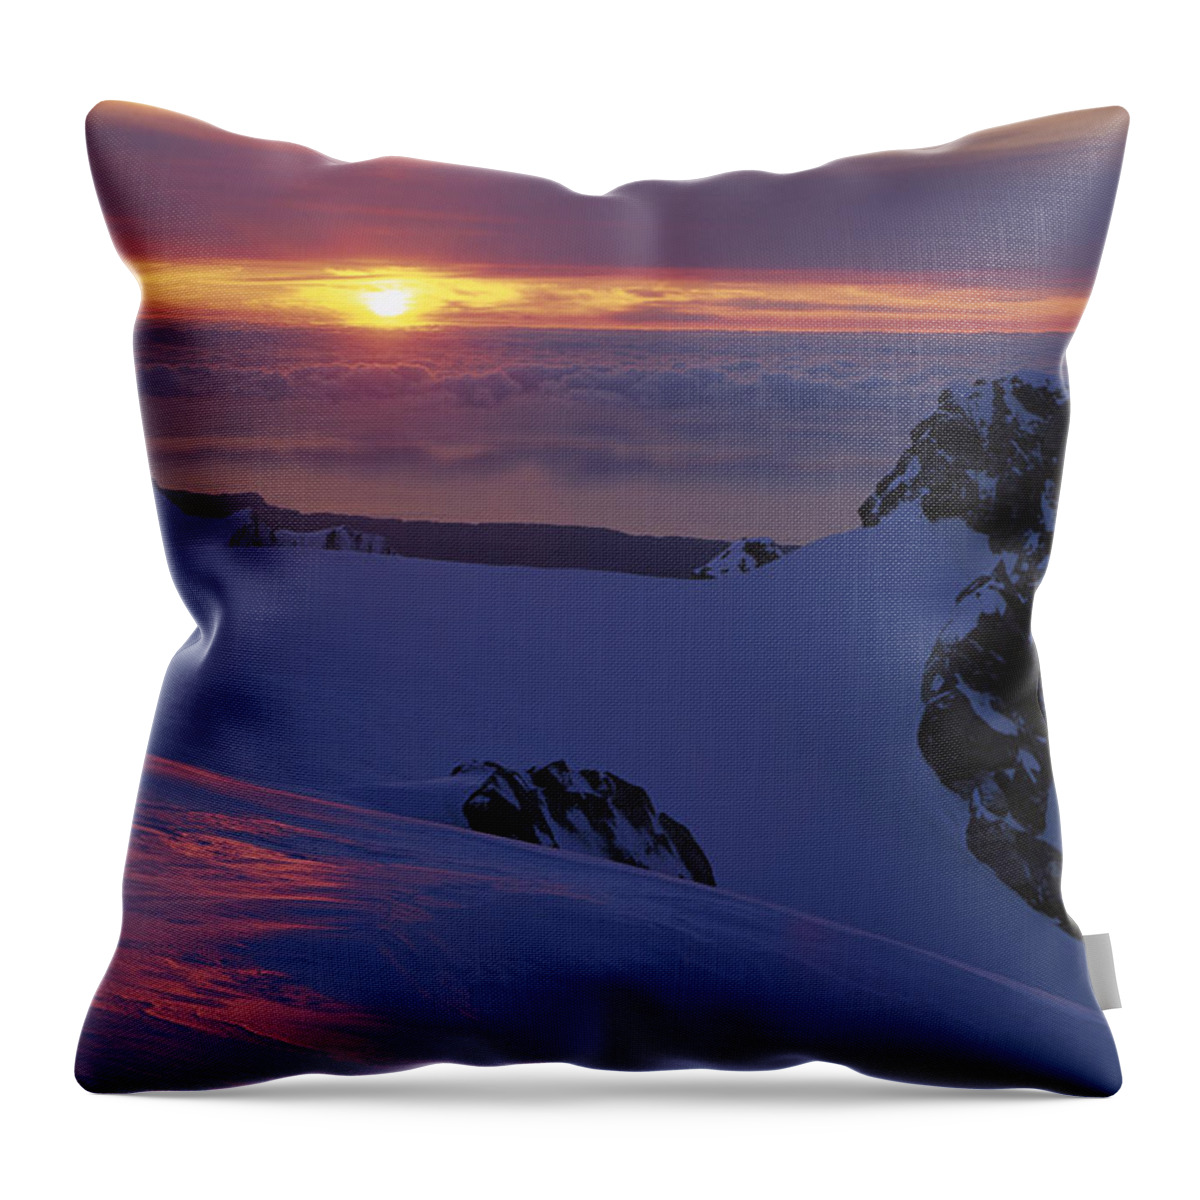 Feb0514 Throw Pillow featuring the photograph Skier And Sunsert On Franz Josef Glacier by Colin Monteath